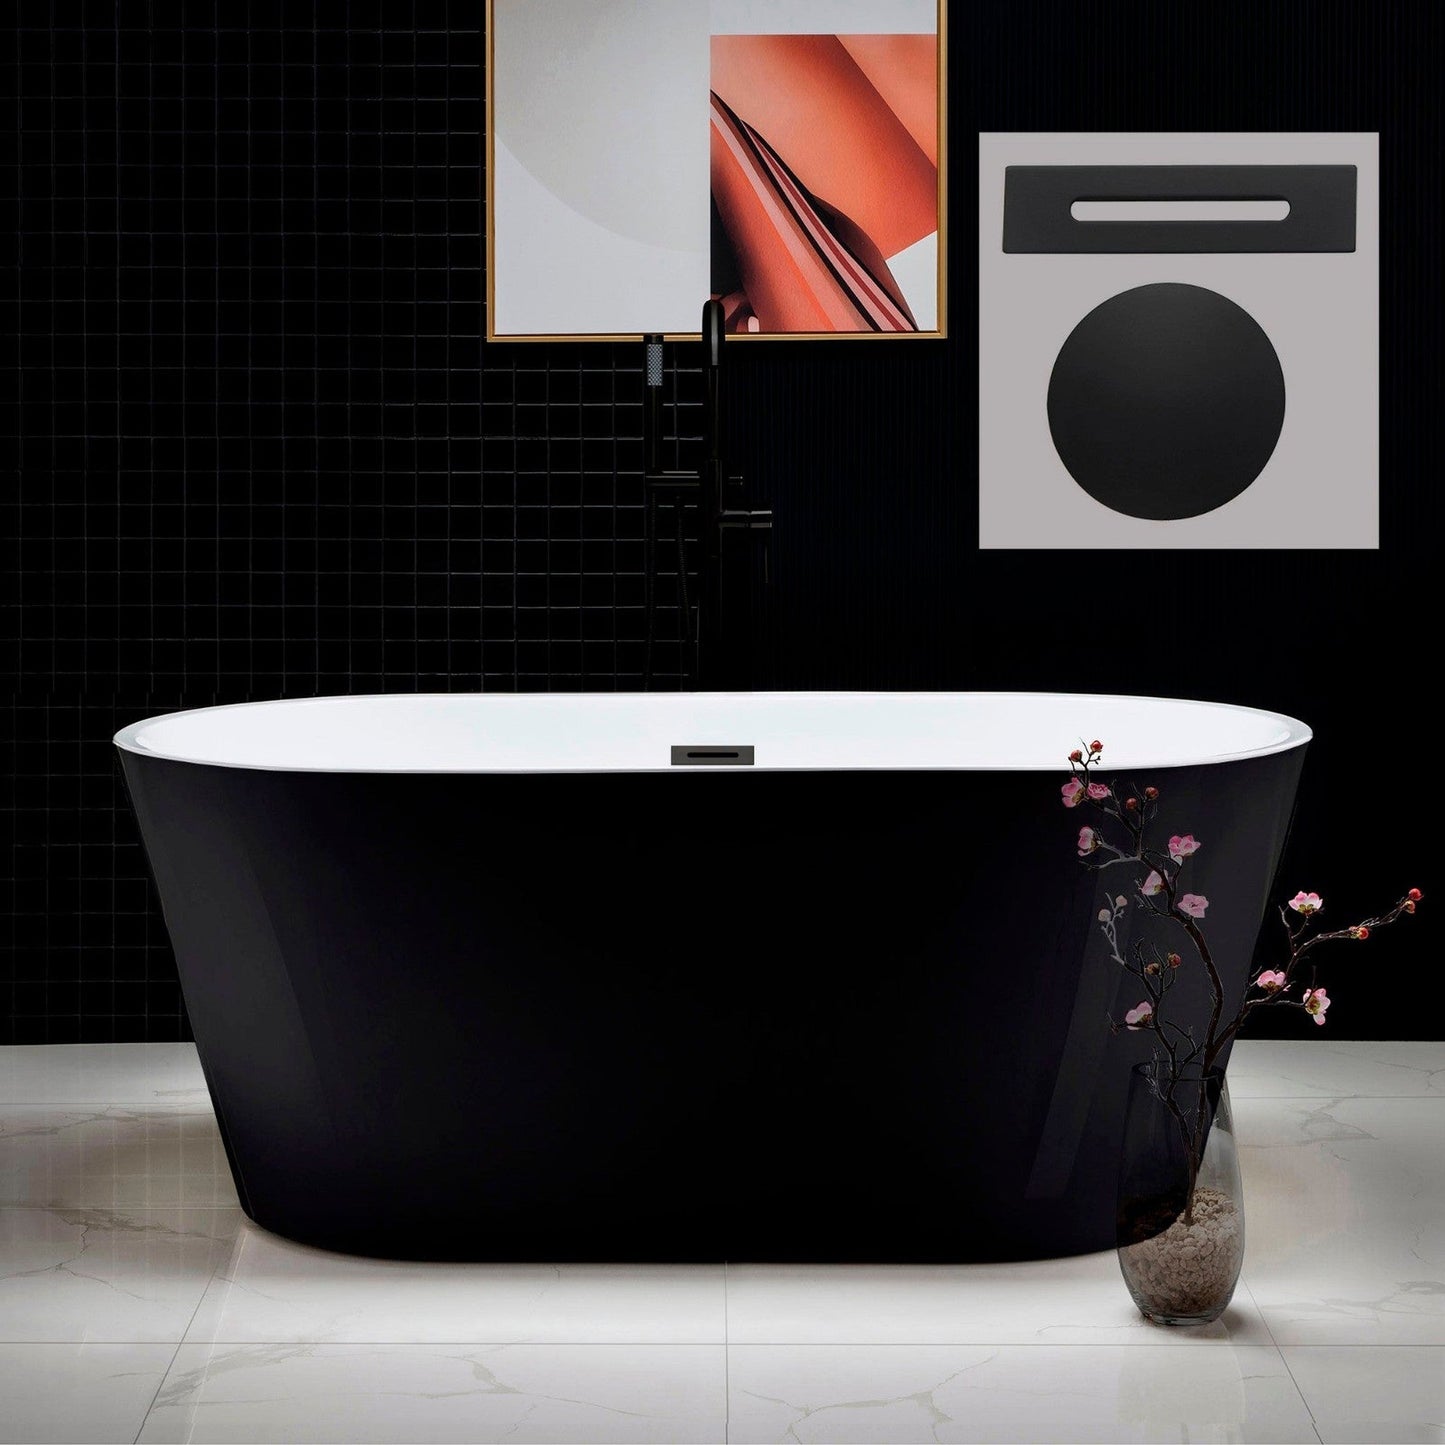 WoodBridge 59" Black Acrylic Freestanding Contemporary Soaking Bathtub With Matte Black Drain, Overflow, F0025MBVT Tub Filler and Caddy Tray